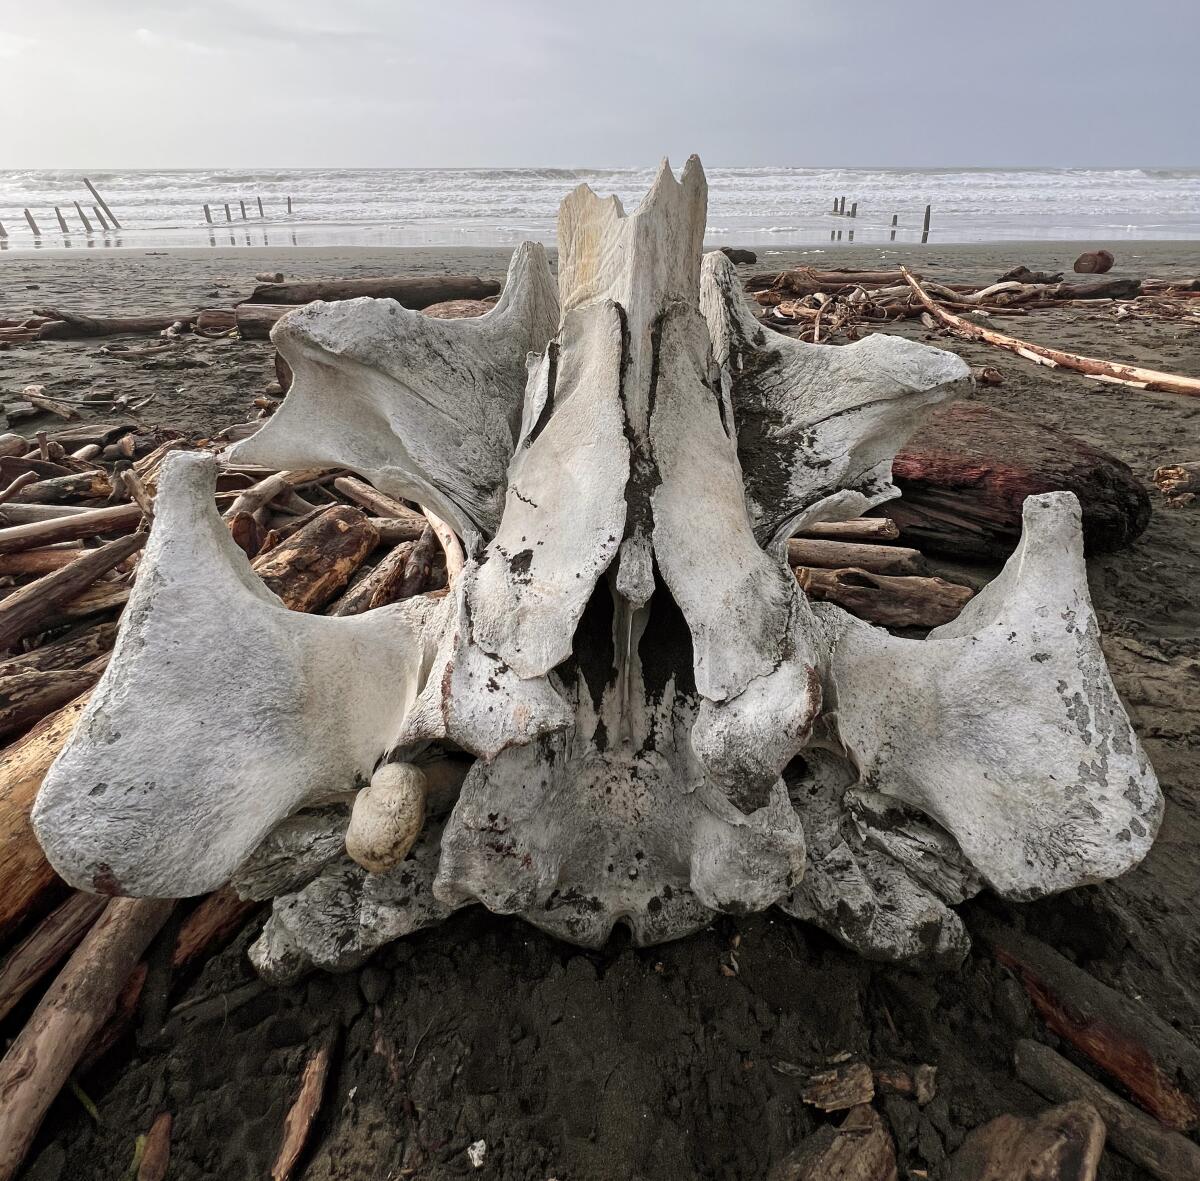 Closeup of large, intricate chunk of bone. In the background is a driftwood-covered beach and surf.